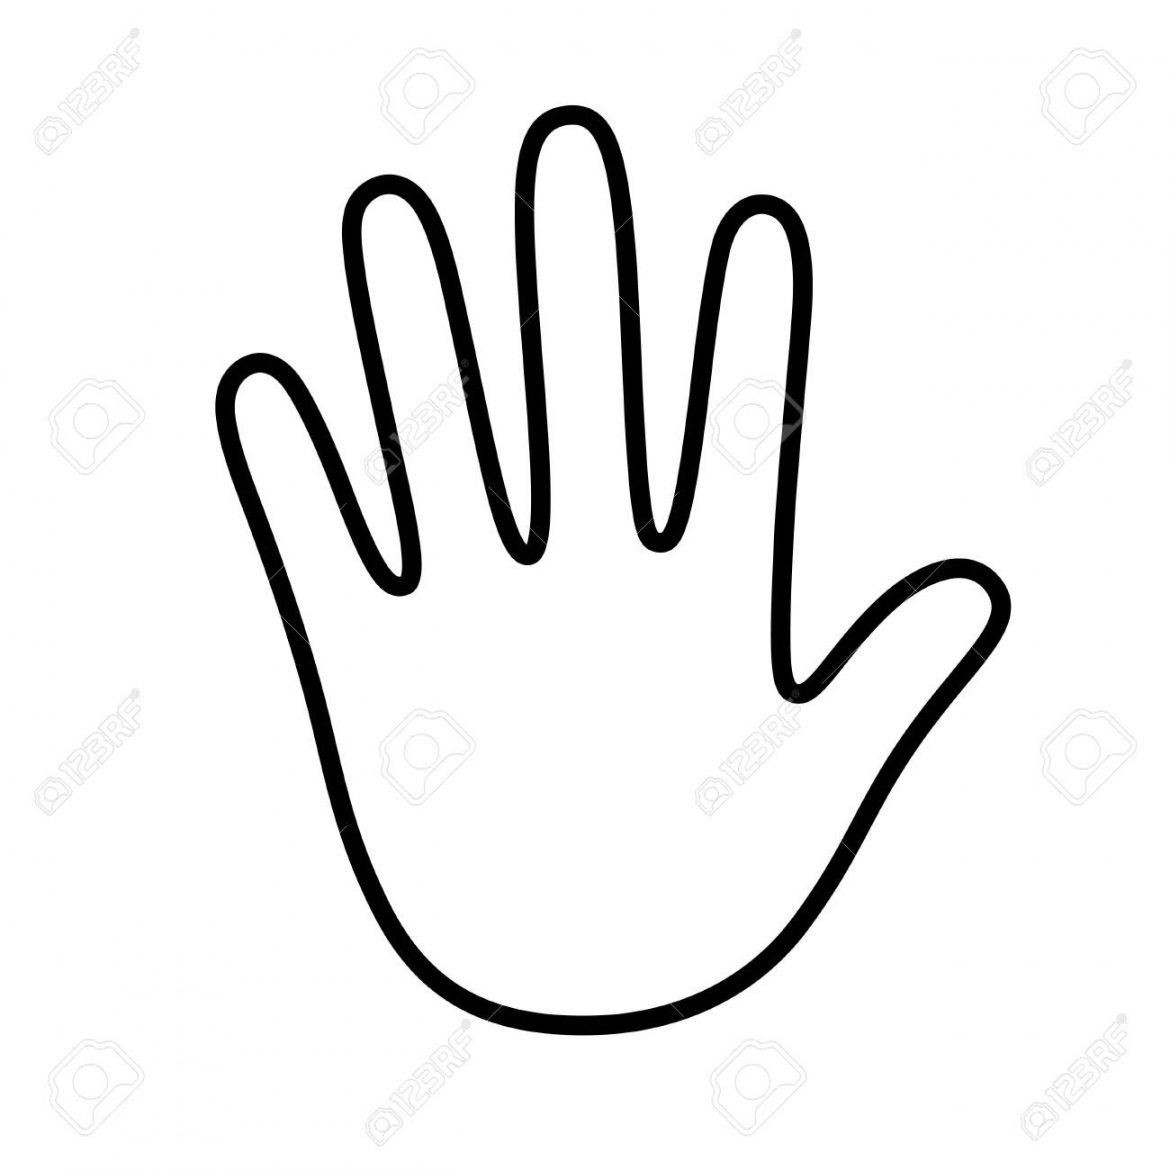 Human Palm Outline, Stylized Handprint Trace - Traced Hand